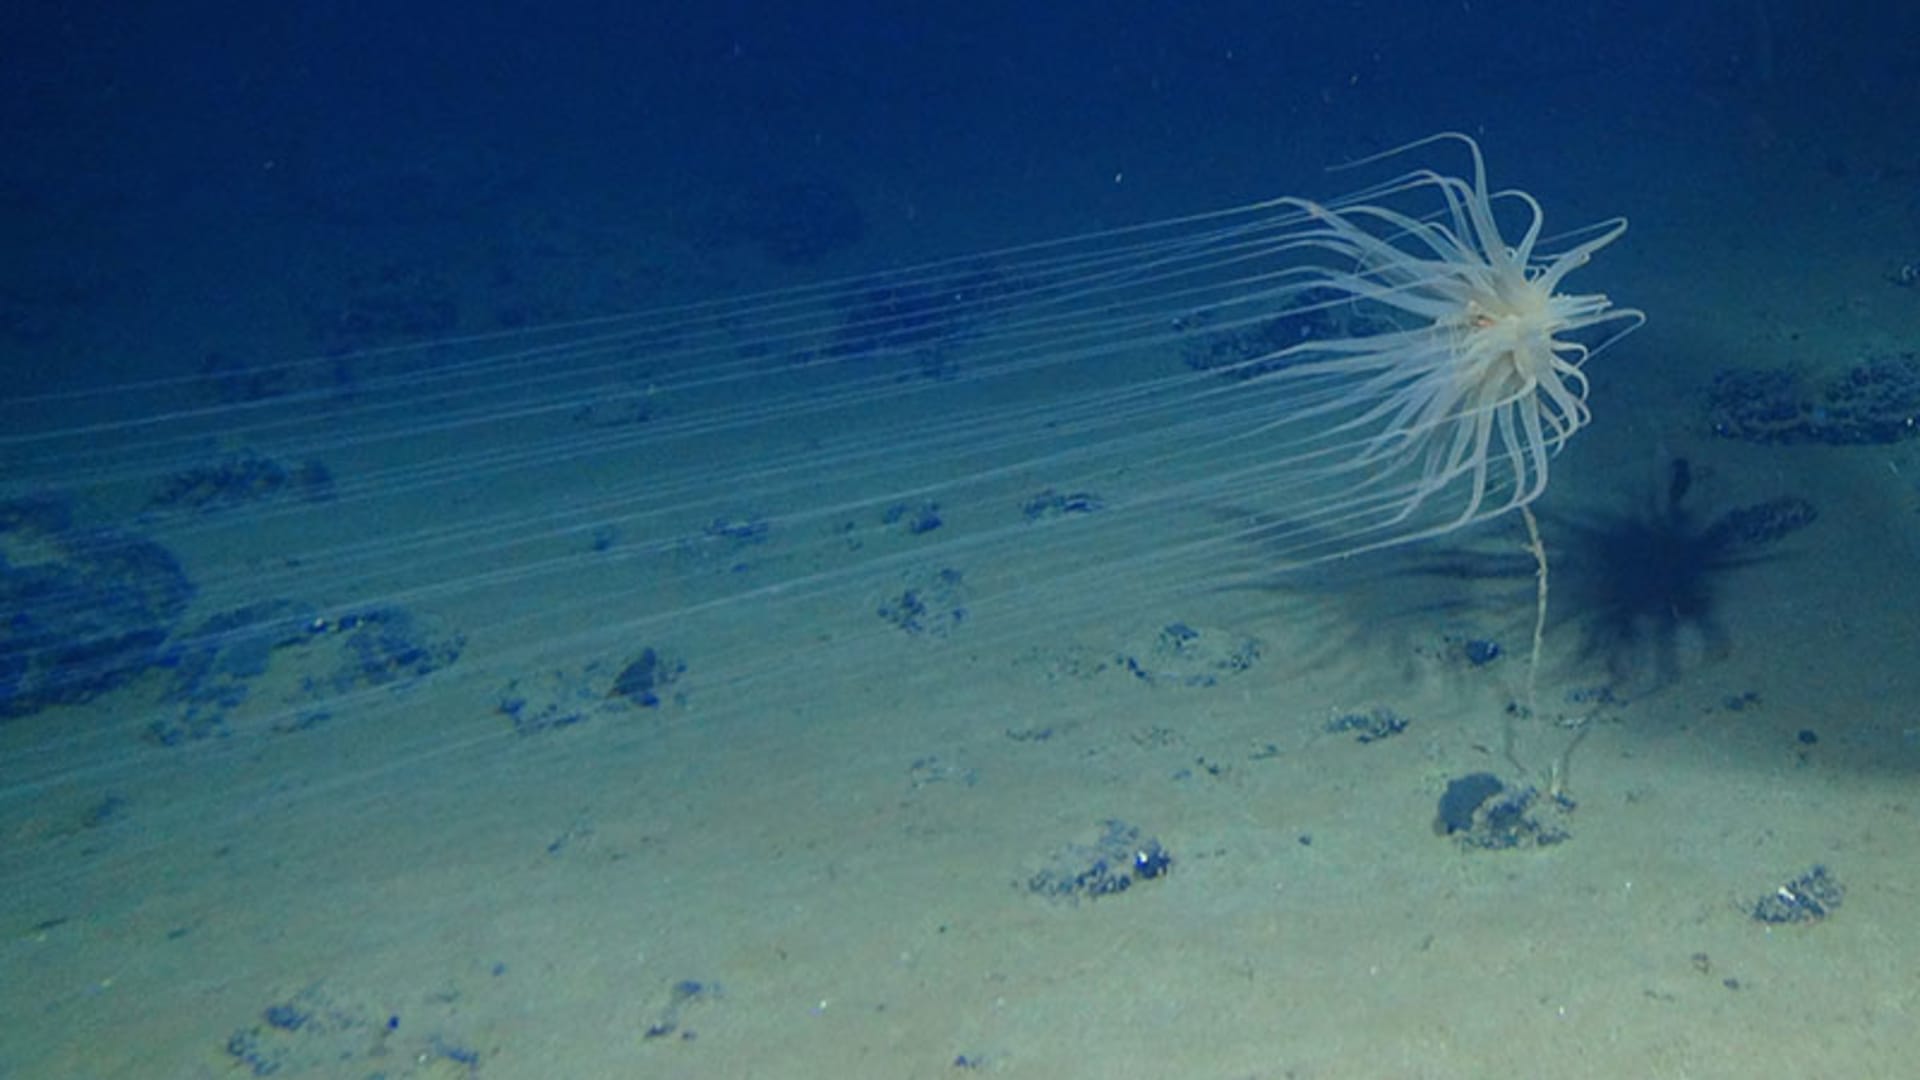 This image is of a new species from a new order of Cnidaria collected at 4,100 meters in the Clarion Clipperton Zone. This creature depends on sponge stalks attached to nodules to live. Photo courtesy the National Oceanic and Atmospheric Administration.